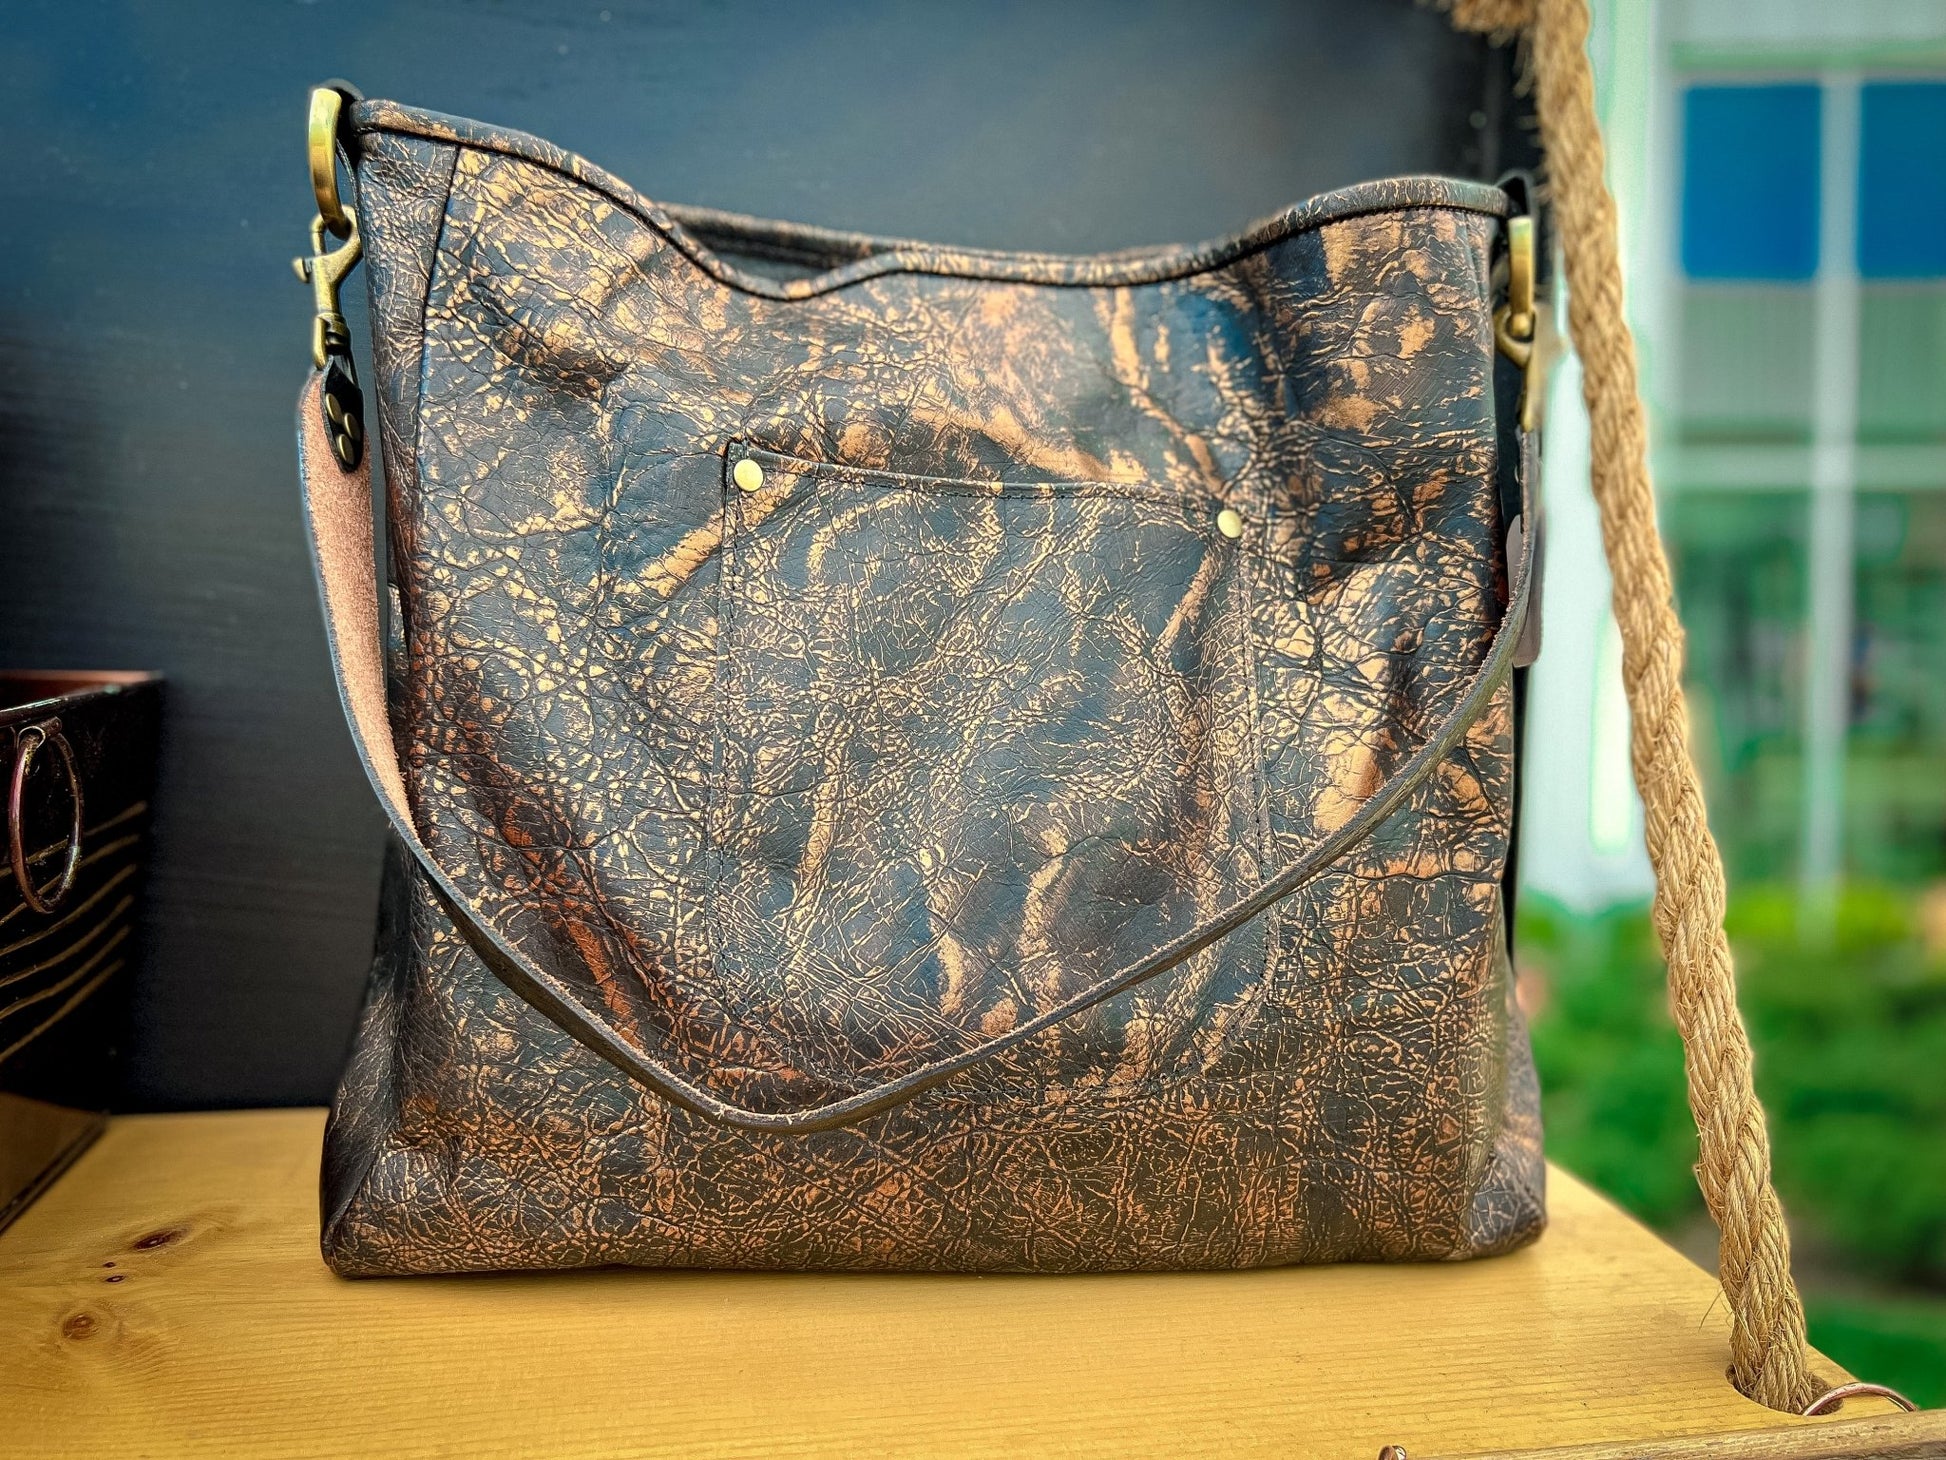 Bronze Leather Tote Bag - 9greyhorses.comBags and Wallets